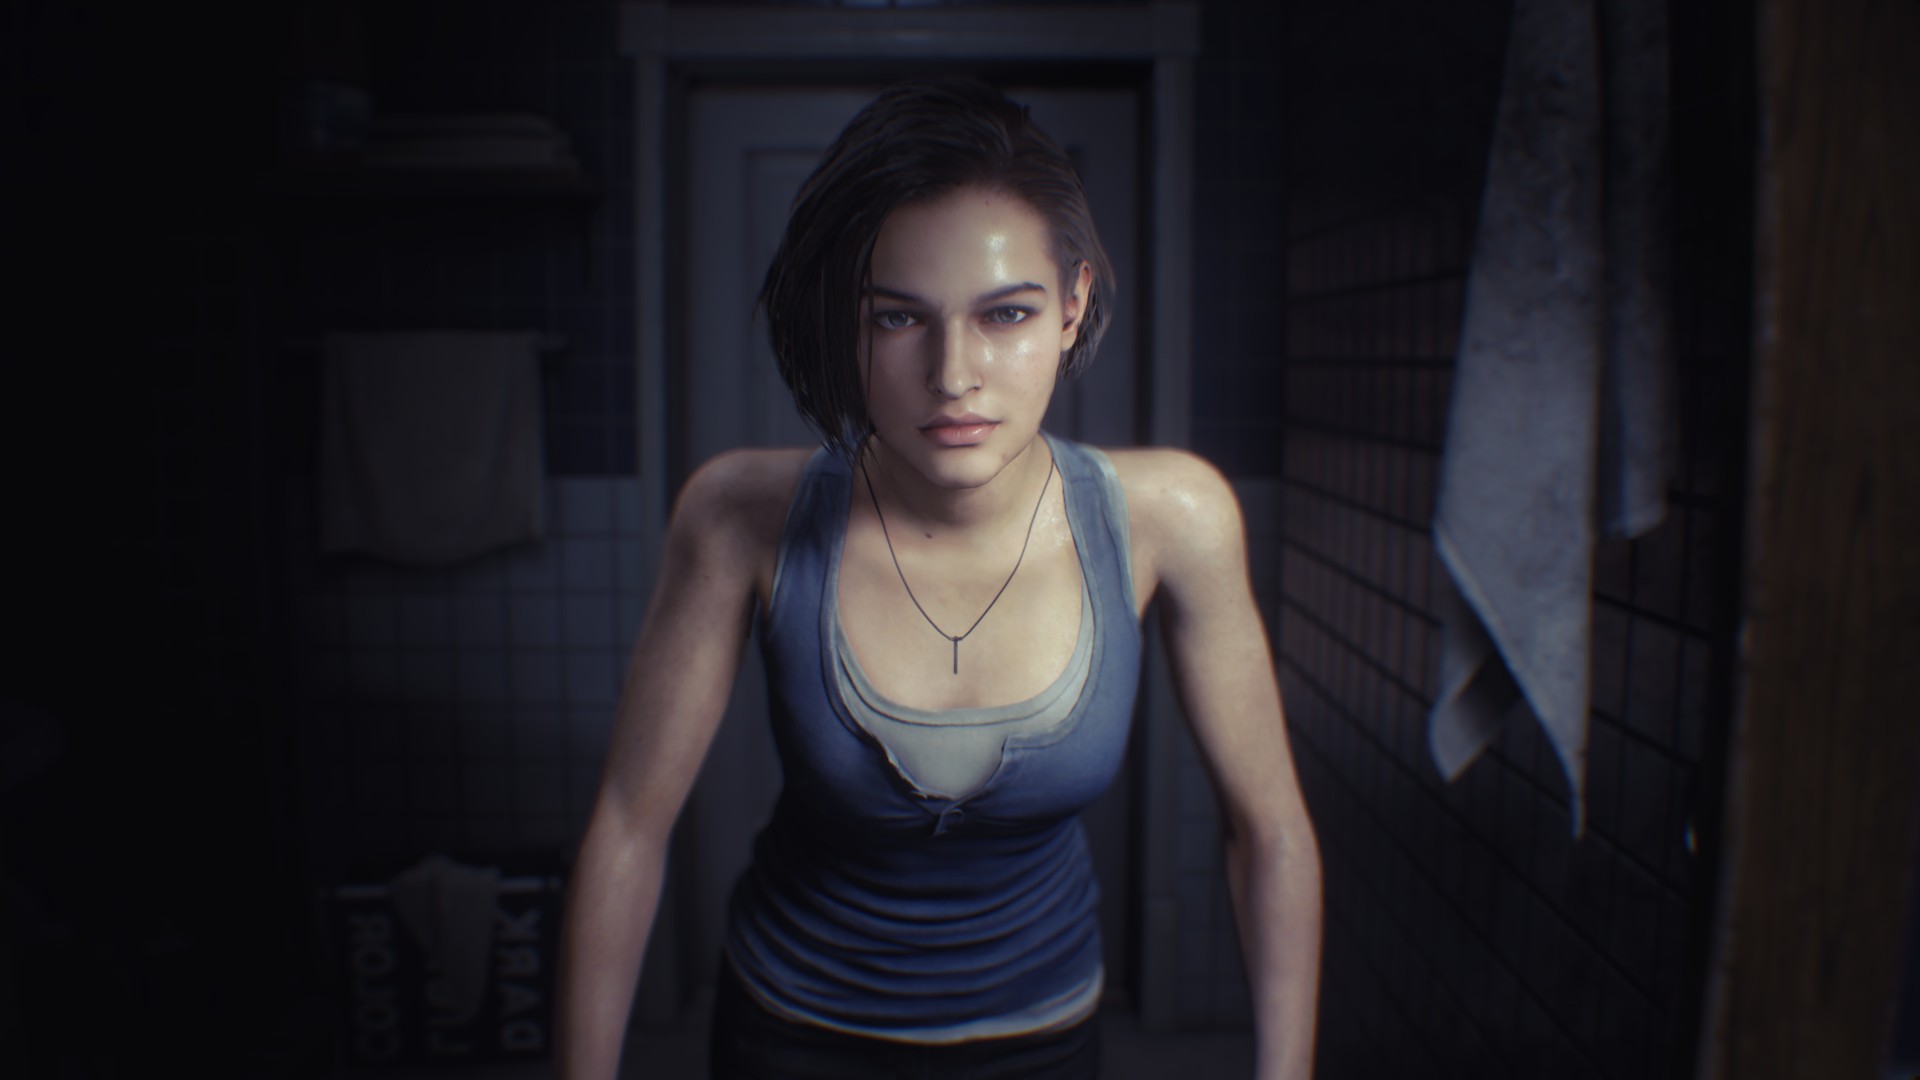 Internet Reacts To Resident Evil 3 Remake And Jill